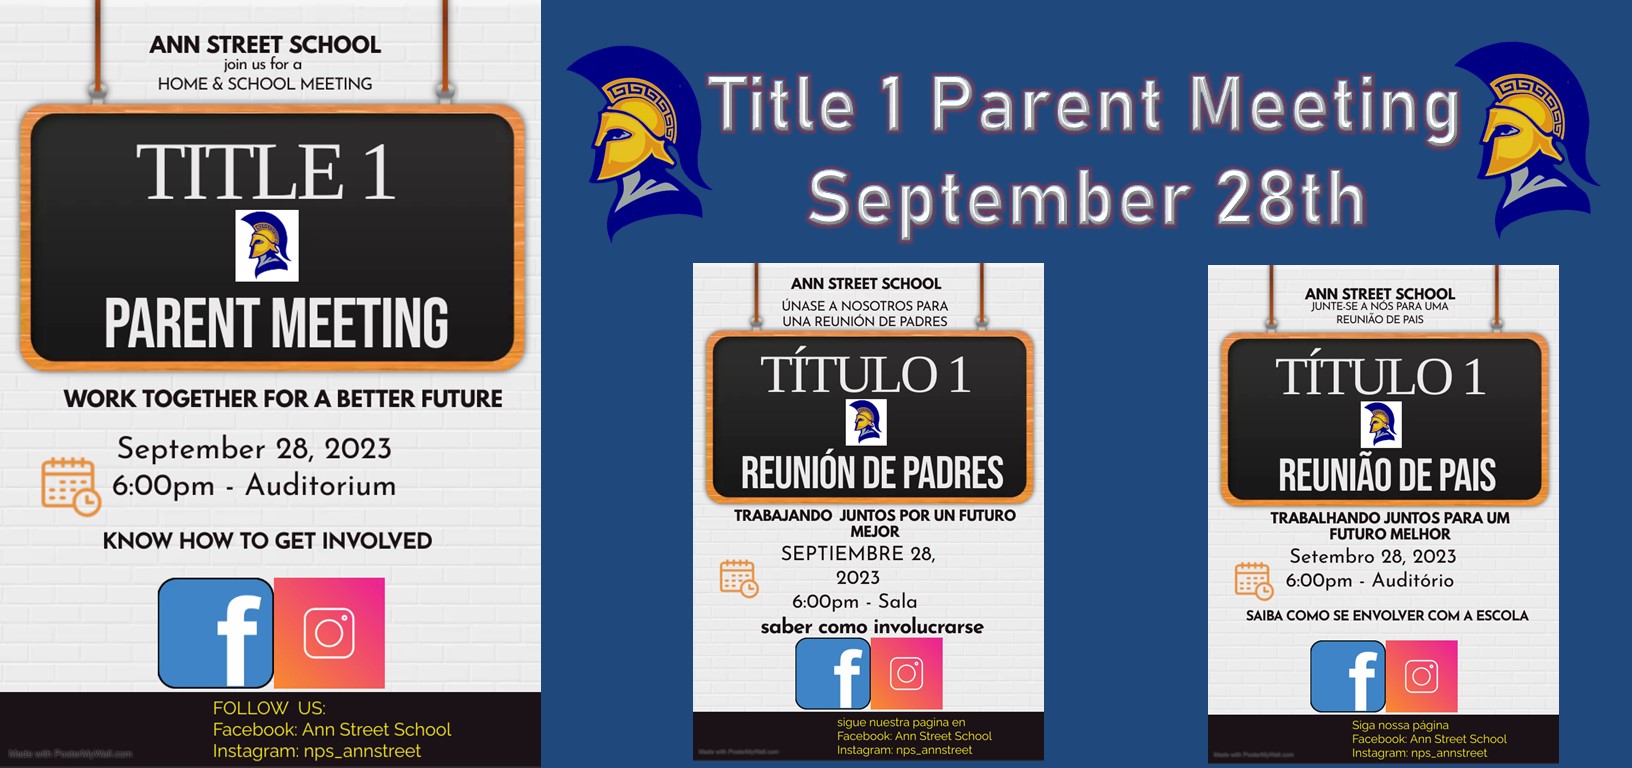 Title 1 Parent Meeting. September 28th, 2023, 6PM.